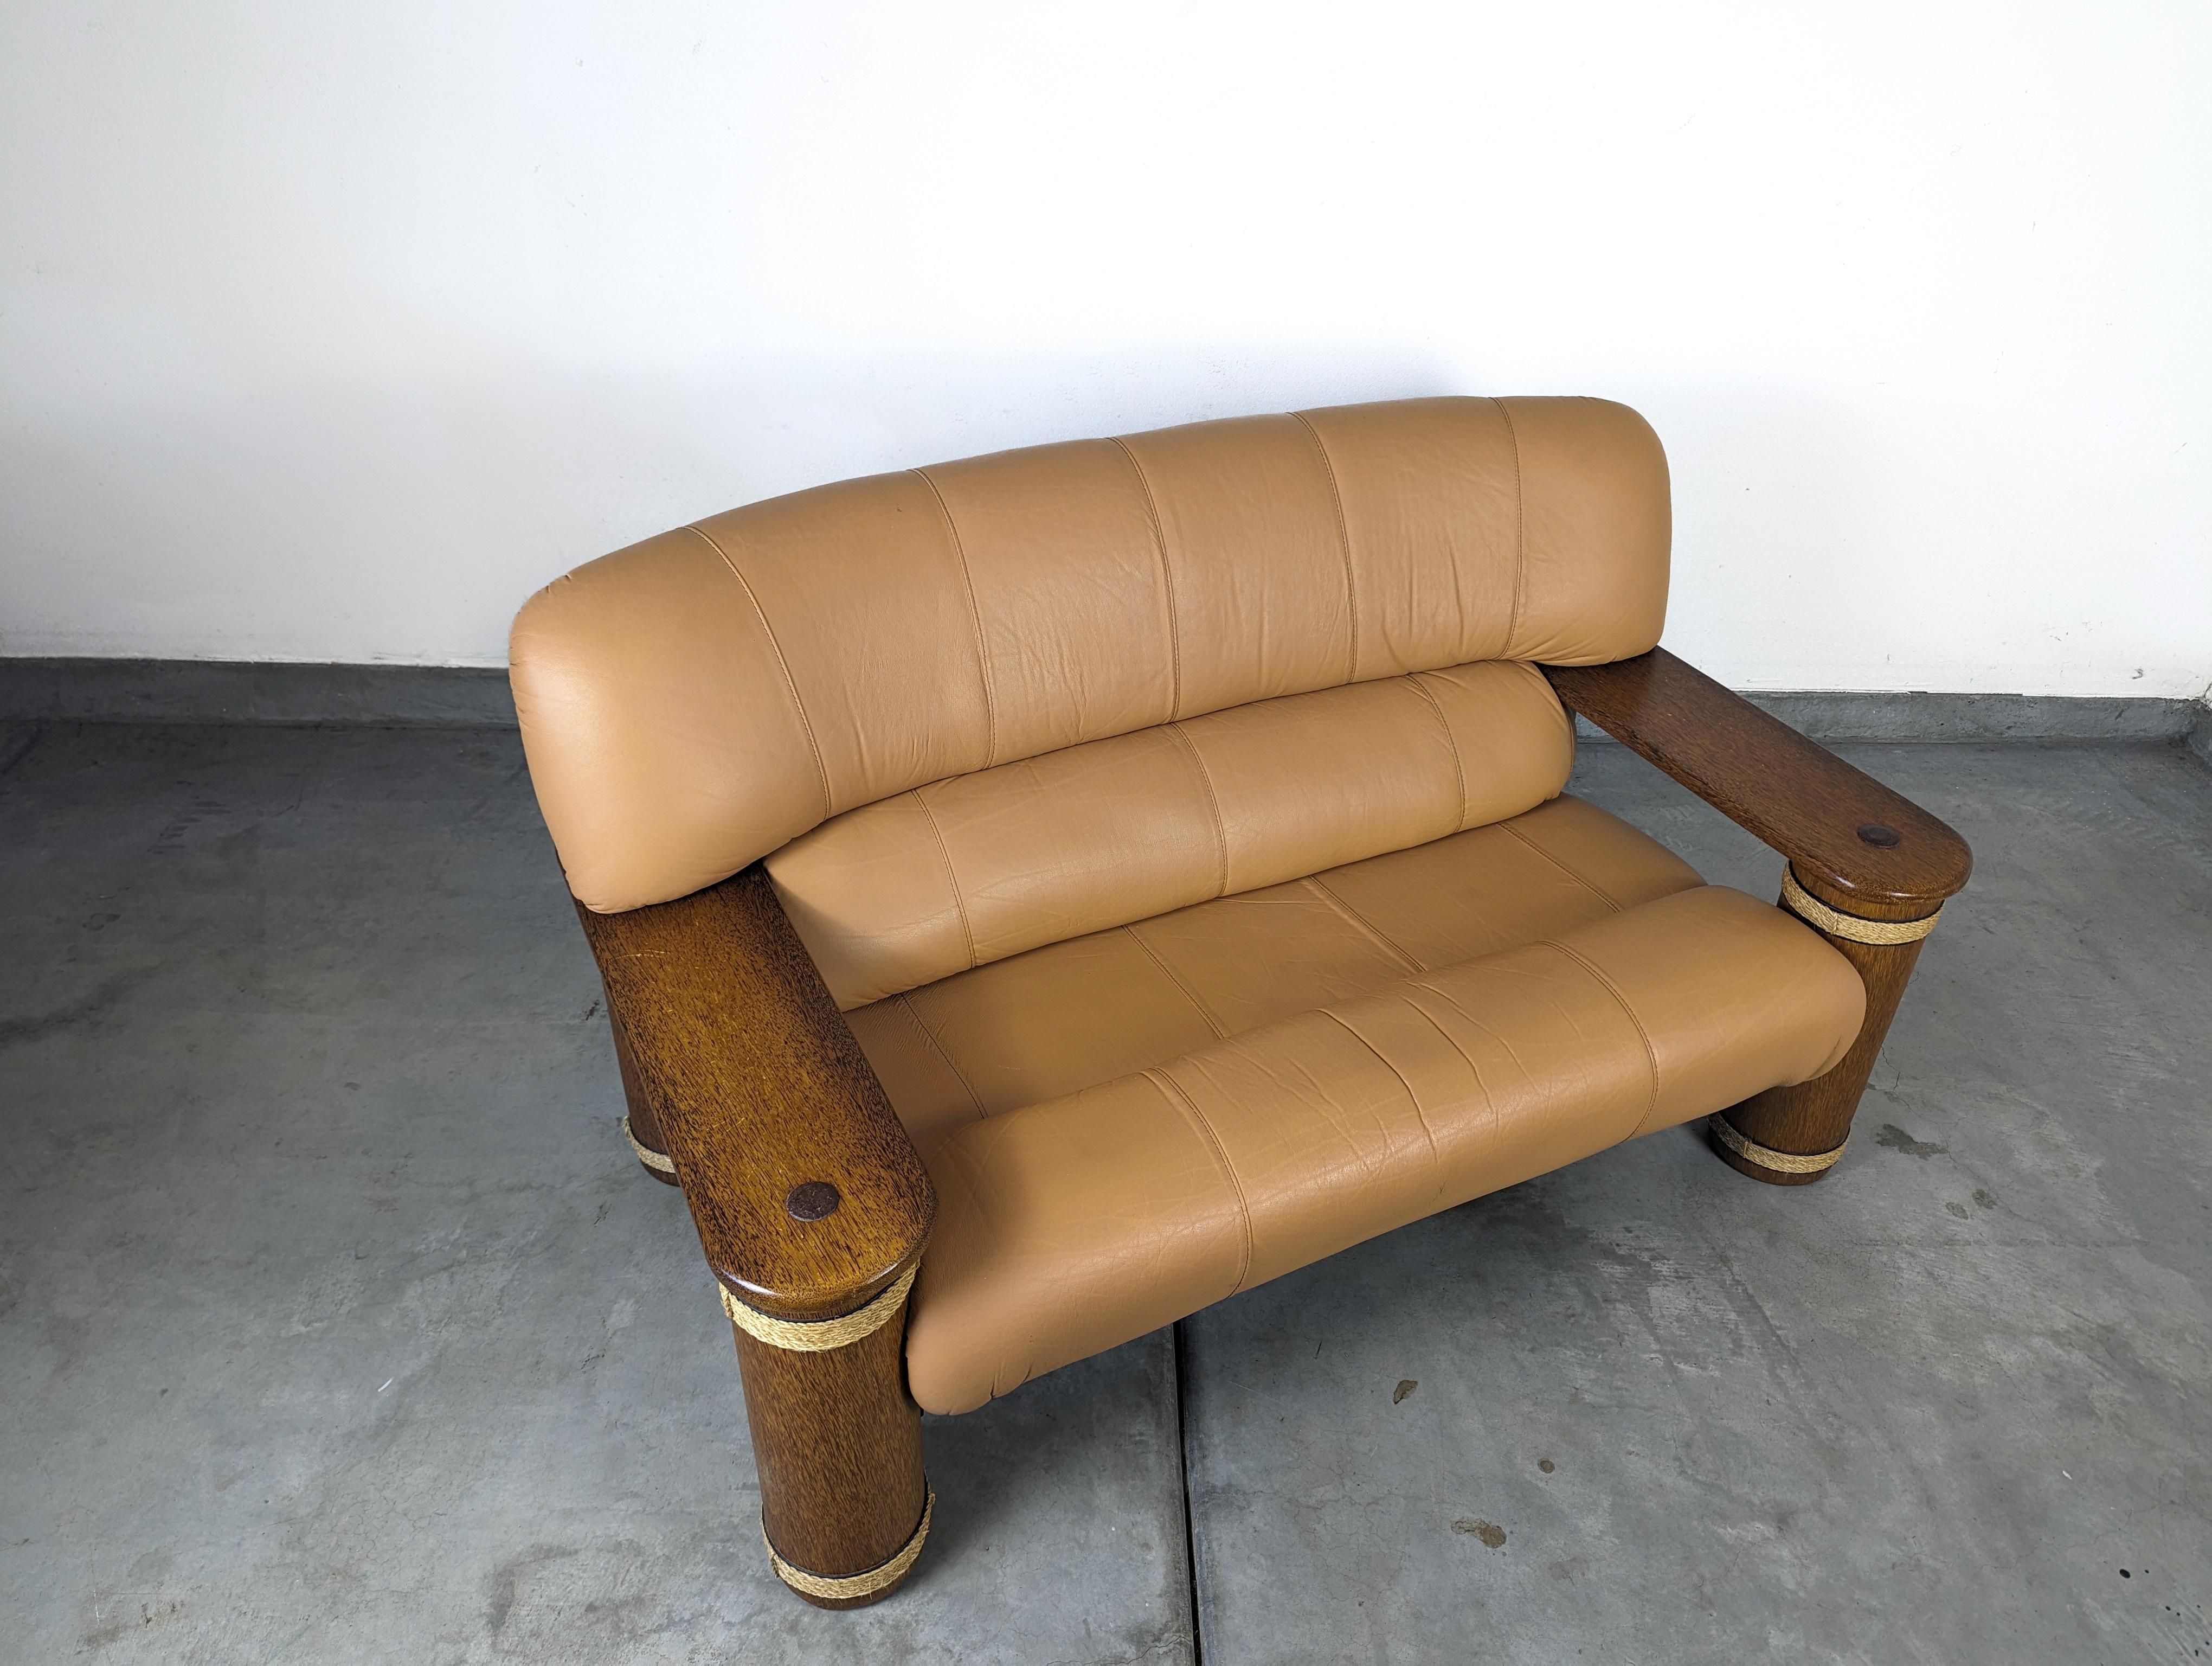 Vintage Leather and Palmwood Loveseat Sofa by Pacific Green, c1990s For Sale 3